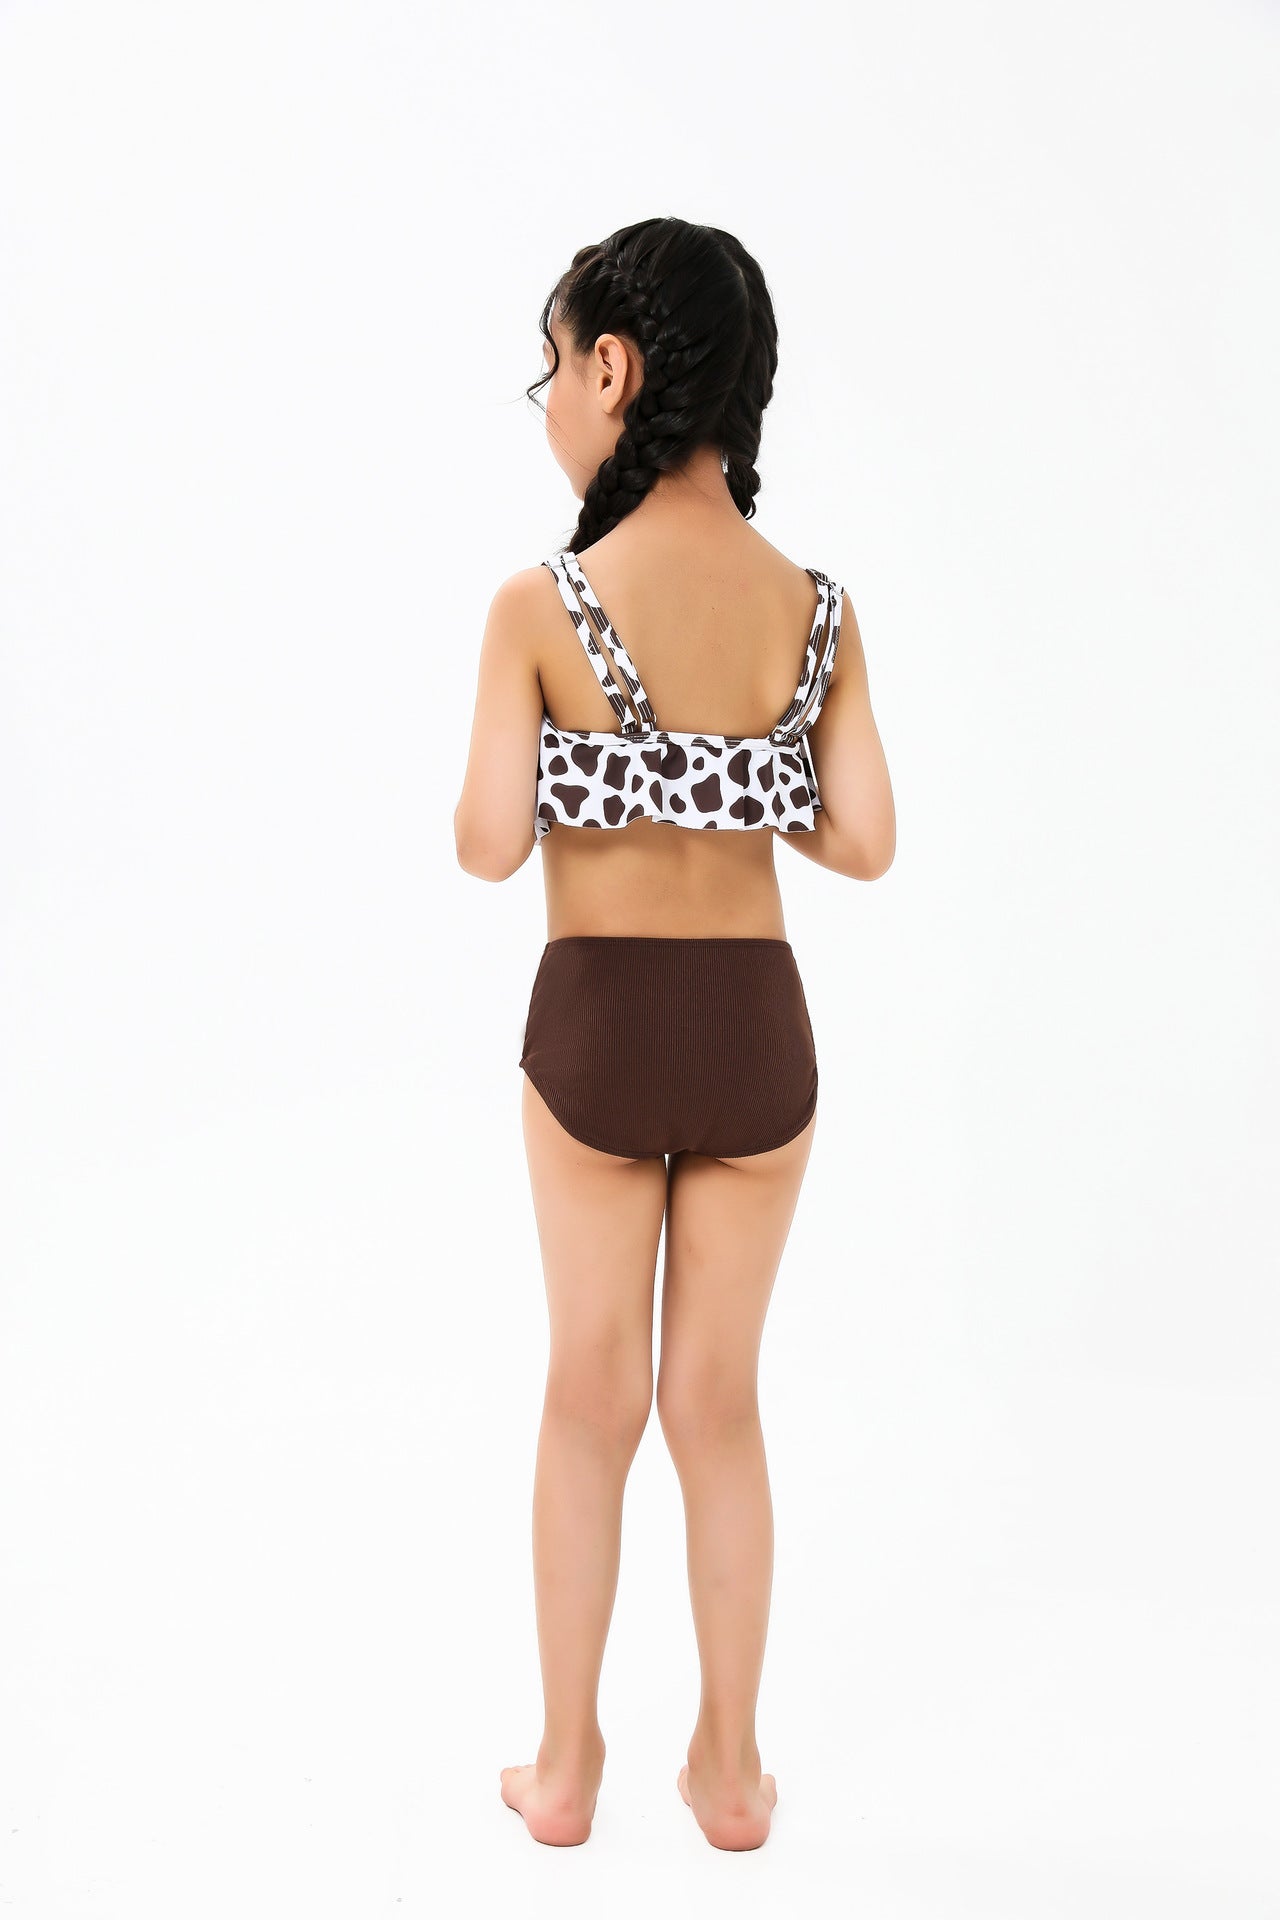 Leopard Print Matching Swimsuits For Mom and Daughter